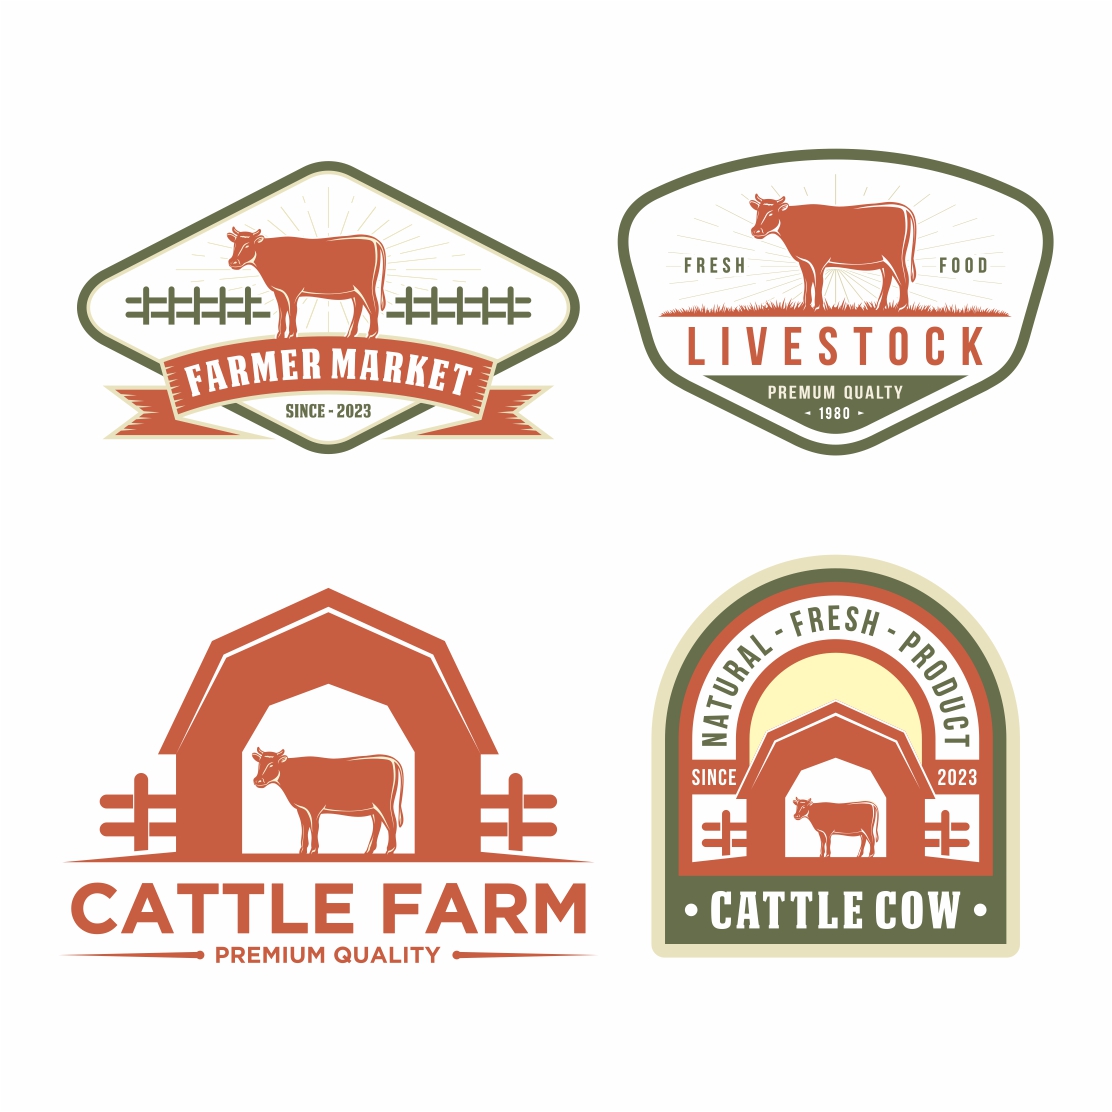 Cattle Farm logo design collection - only 10$ preview image.